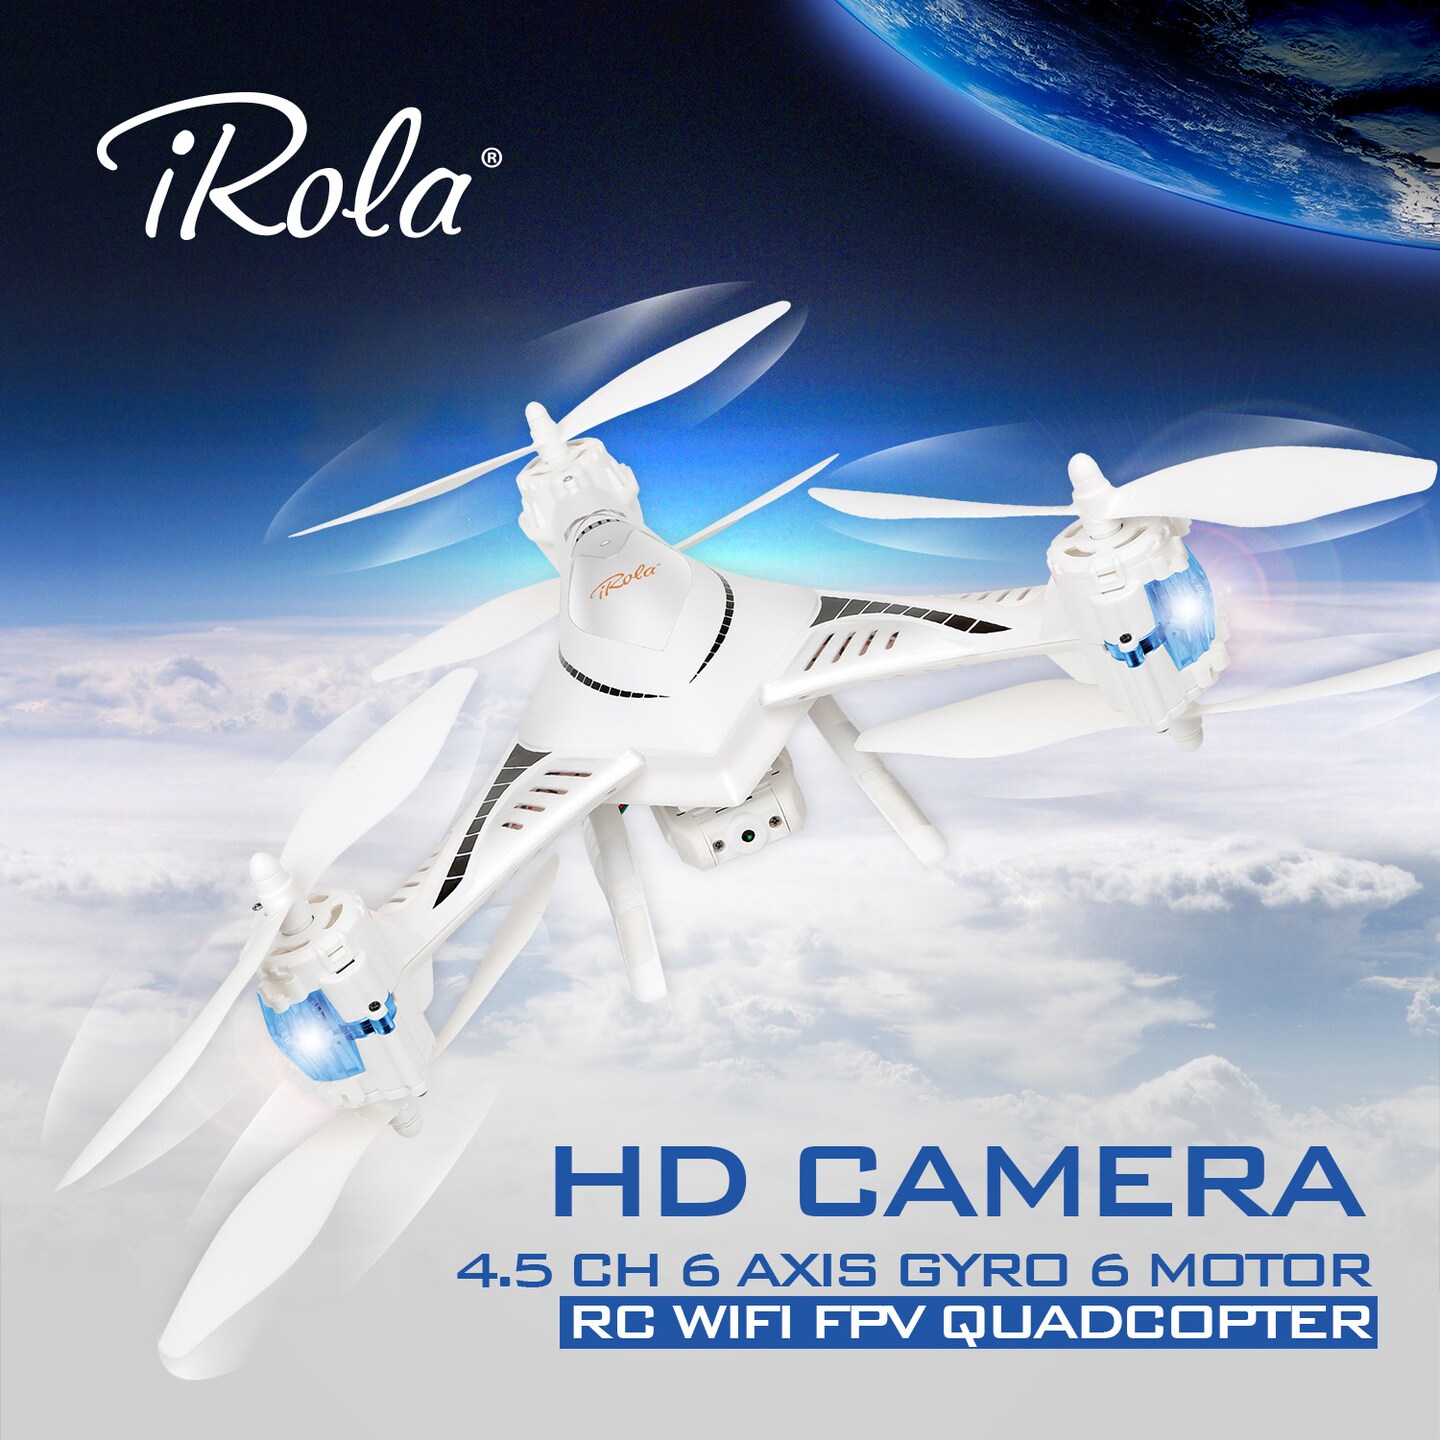 Global Phoenix 4.5 Ch 6 Axis Gyro 6 Motor 2.4Ghz RC WIFI FPV Quadcopter with HD Camera